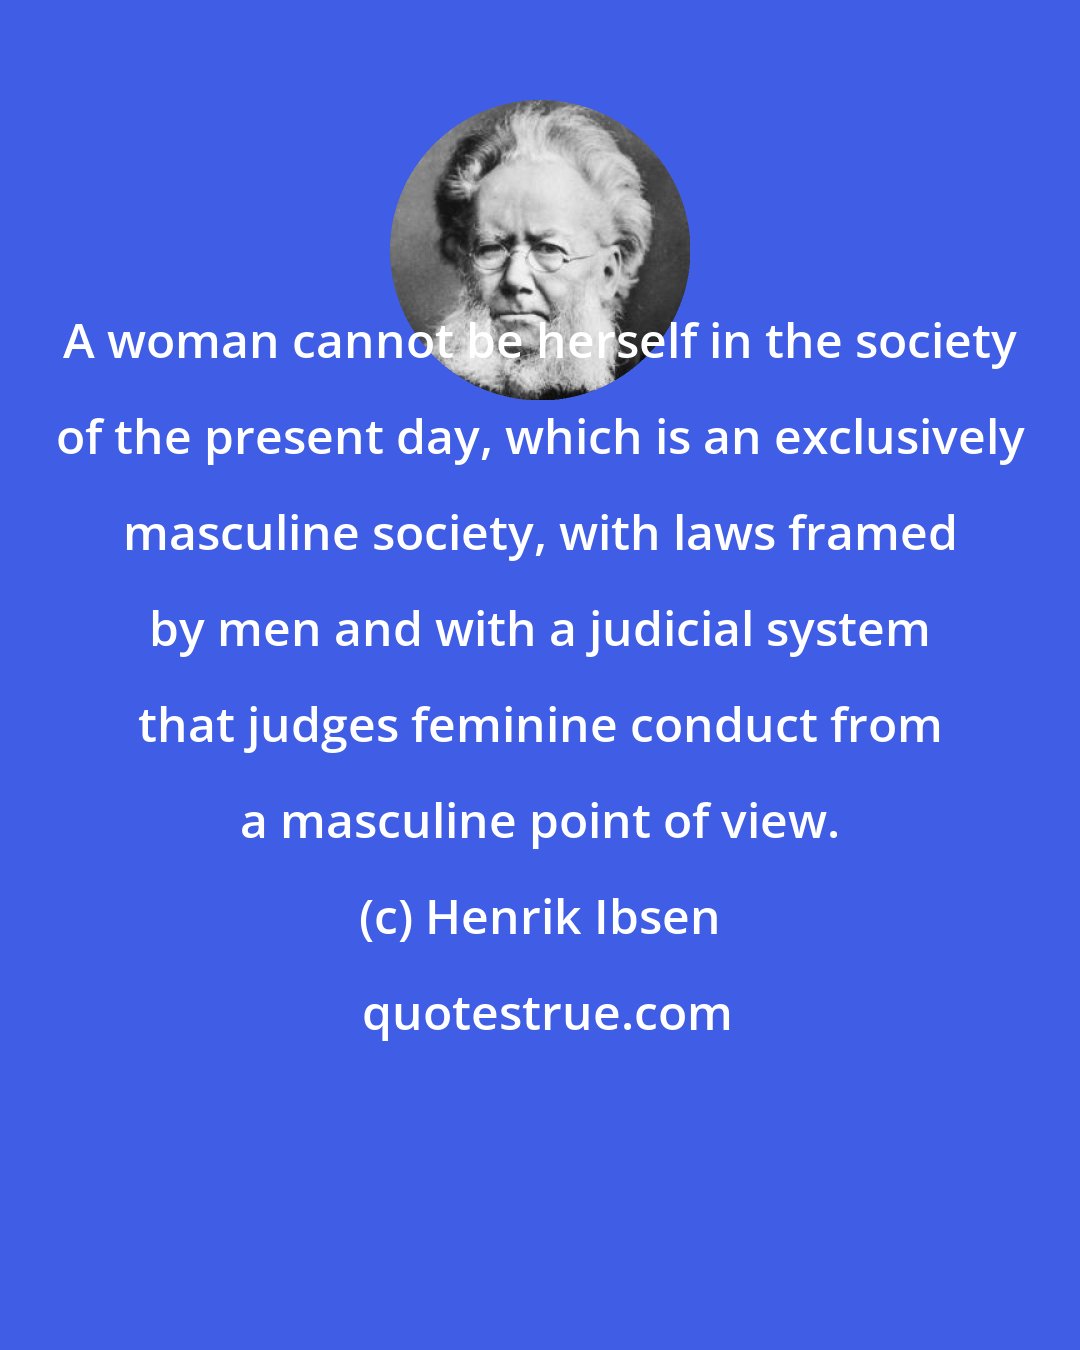 Henrik Ibsen: A woman cannot be herself in the society of the present day, which is an exclusively masculine society, with laws framed by men and with a judicial system that judges feminine conduct from a masculine point of view.